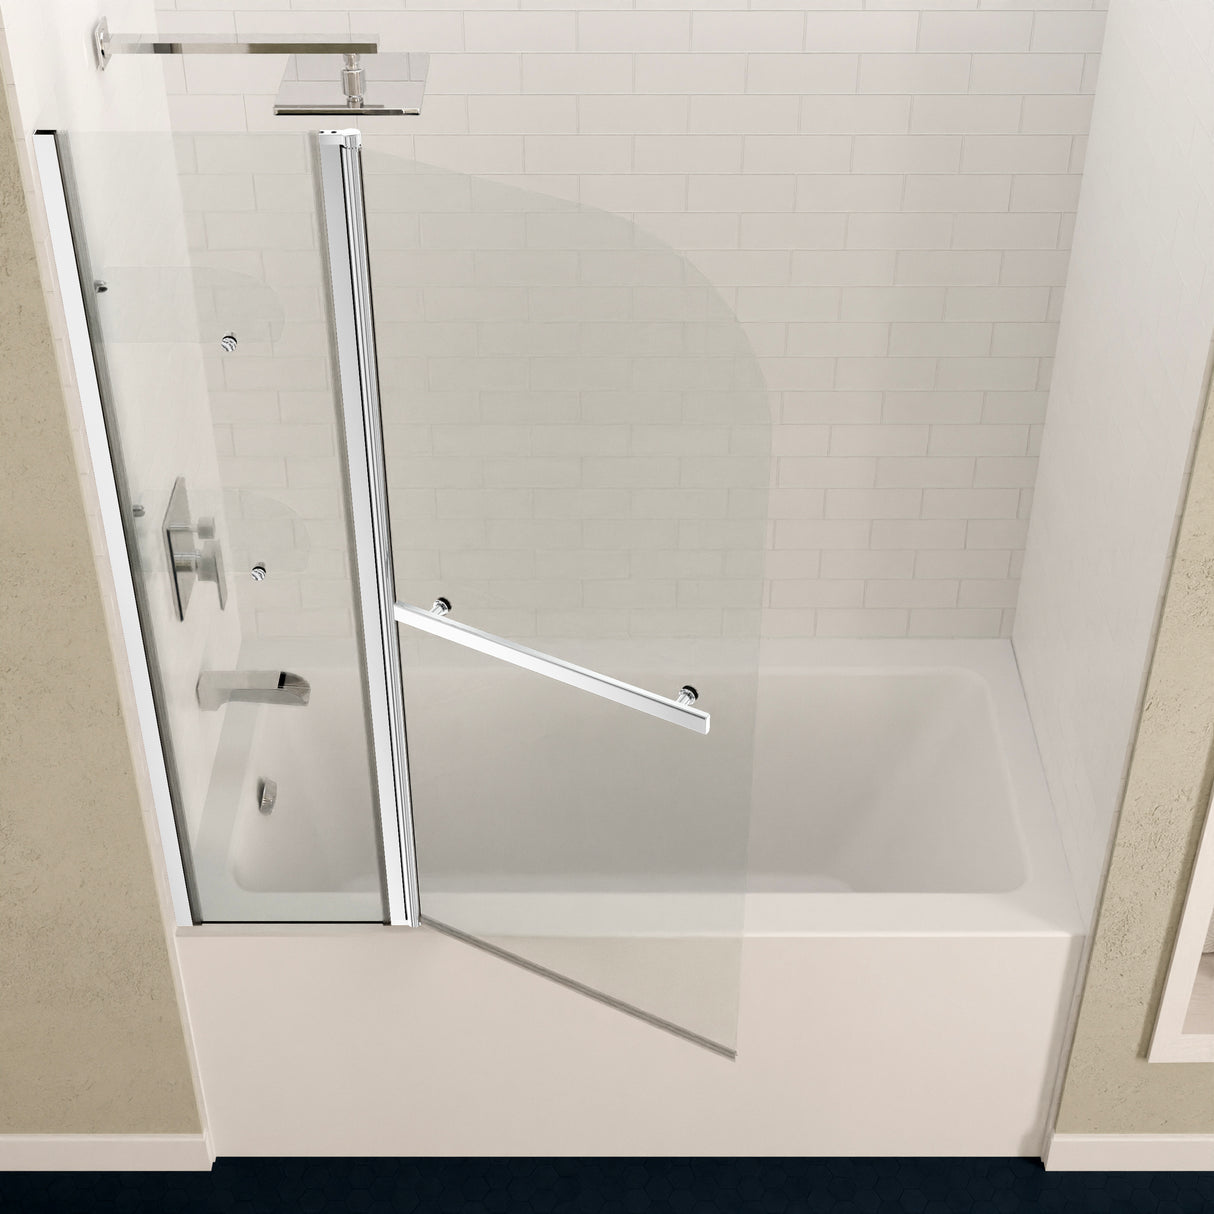 ANZZI SD-AZ054-01CH Galleon 48 in. x 58 in. Frameless Tub Door with TSUNAMI GUARD in Polished Chrome